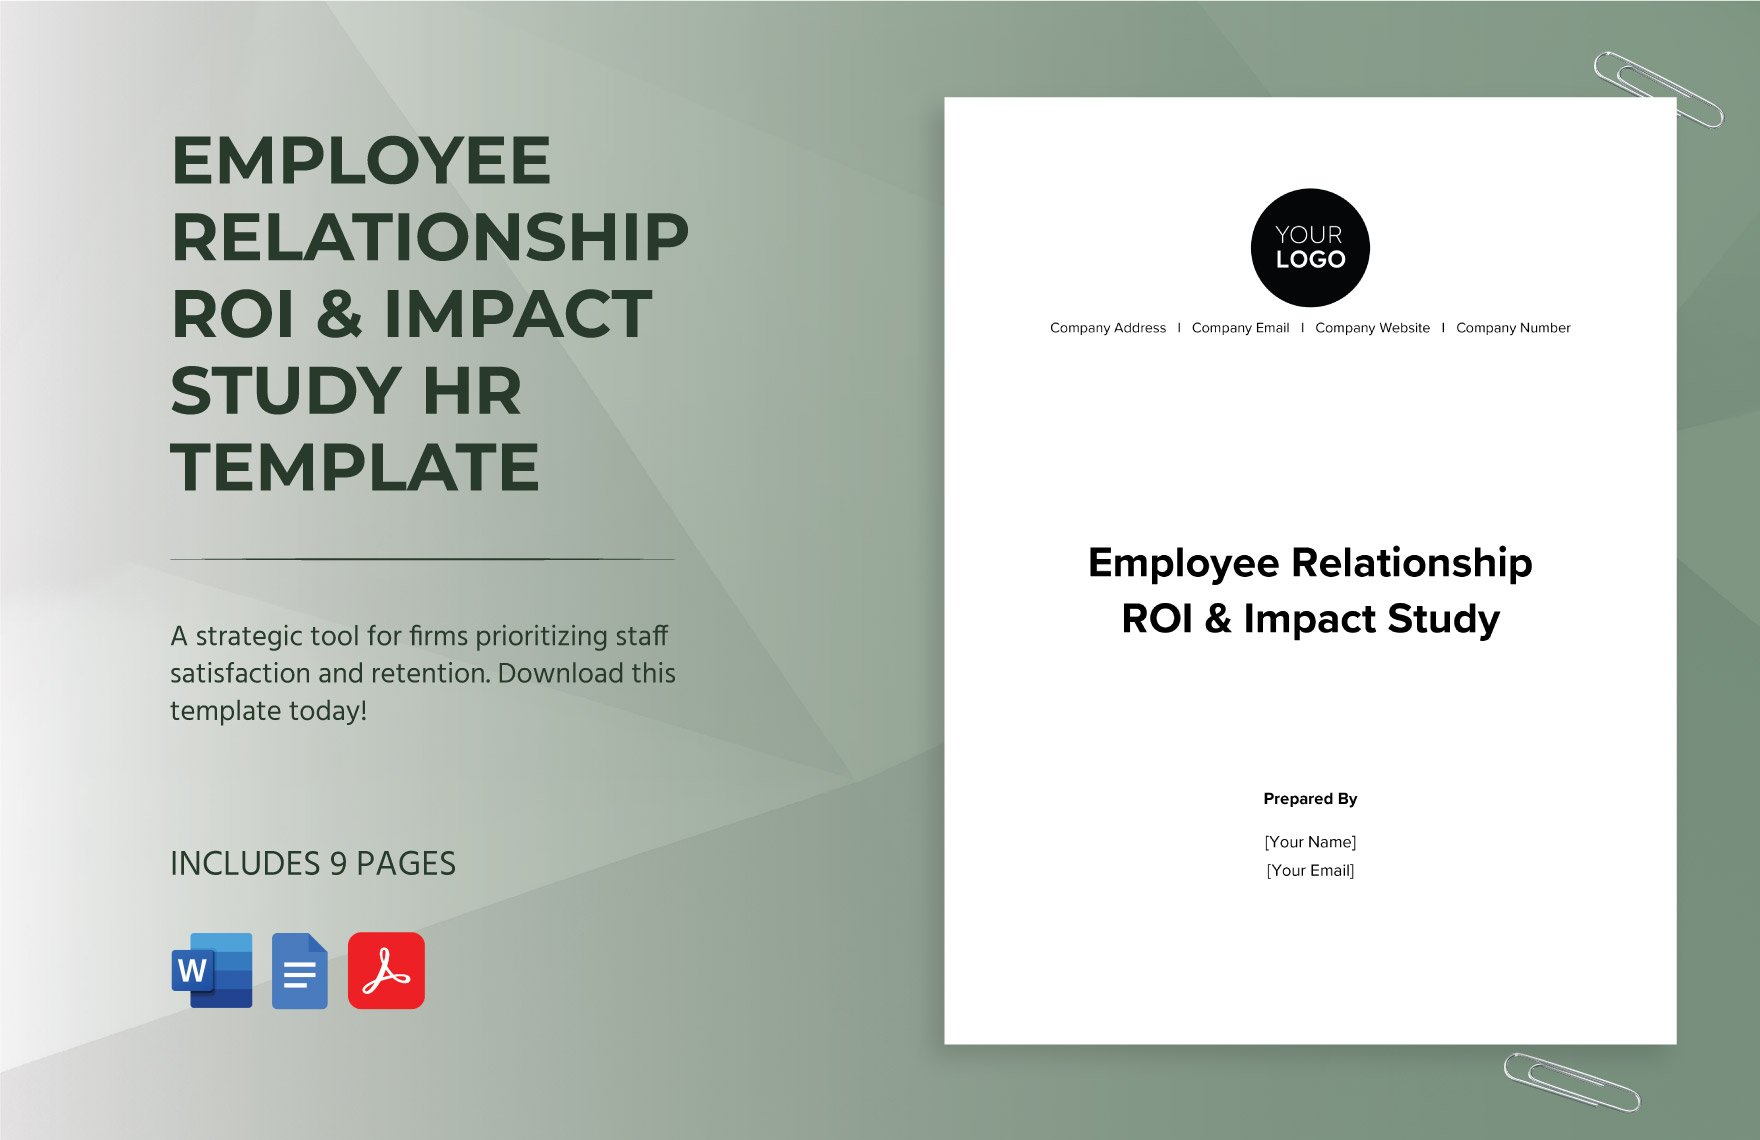 Employee Relationship ROI & Impact Study HR Template in Word, Google Docs, PDF